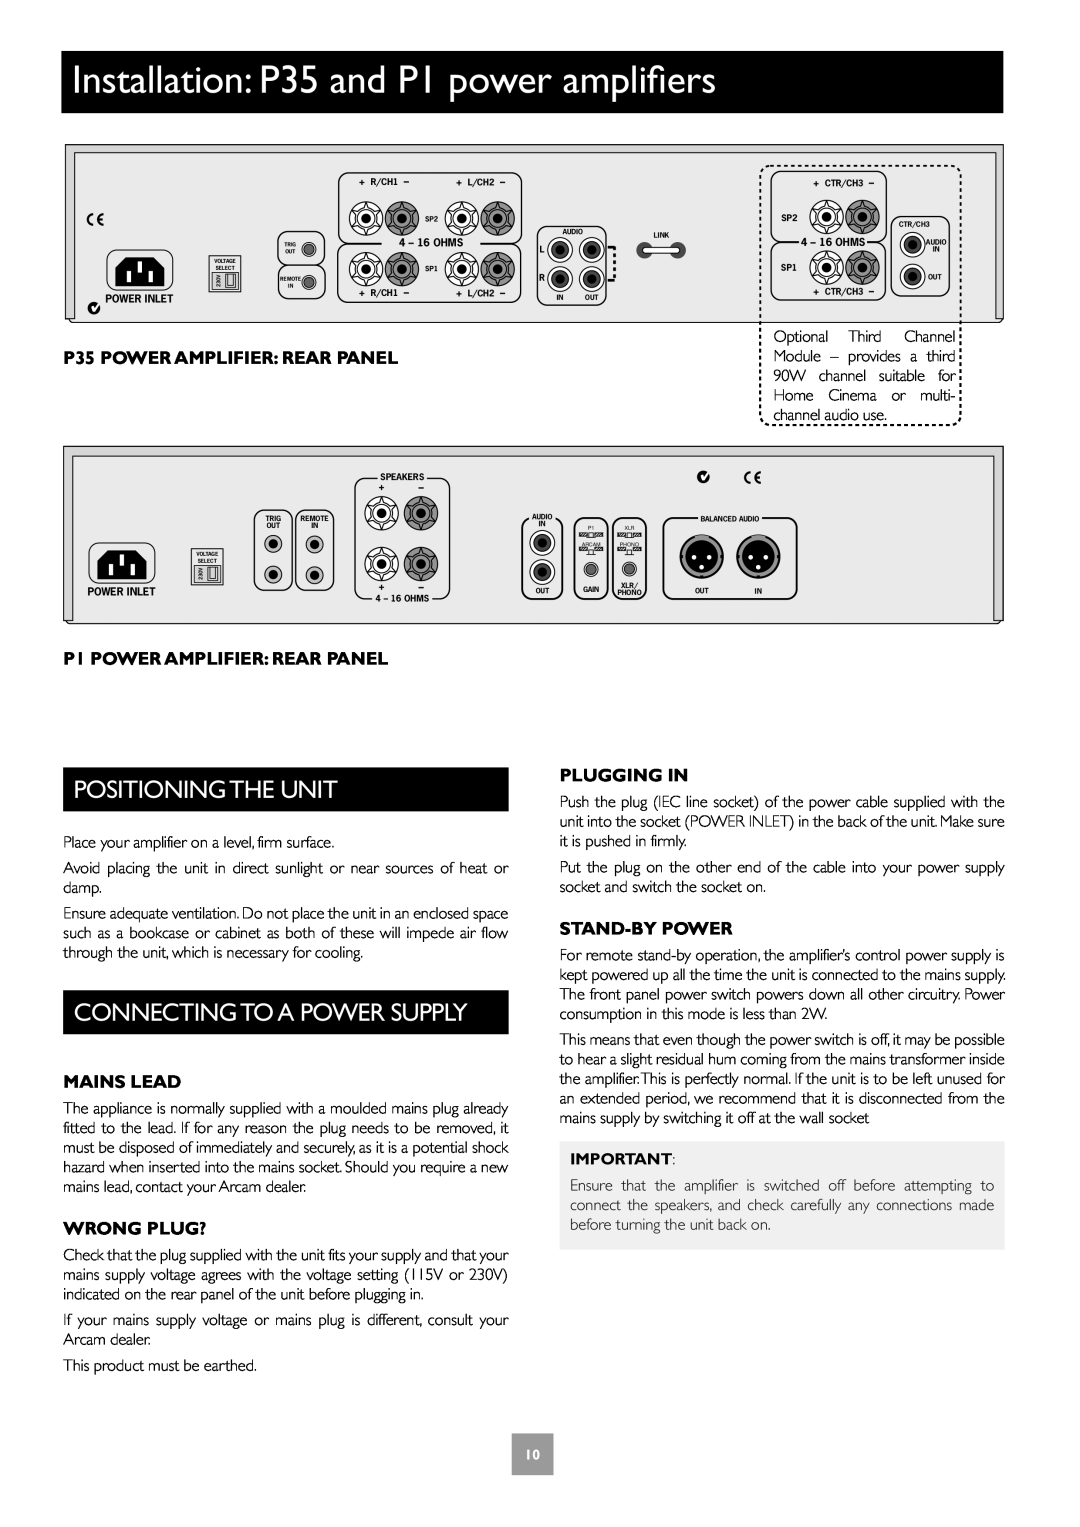 Arcam manual Installation P35 and P1 power amplifiers, P35 POWER AMPLIFIER REAR PANEL, P1 POWER AMPLIFIER: REAR PANEL 